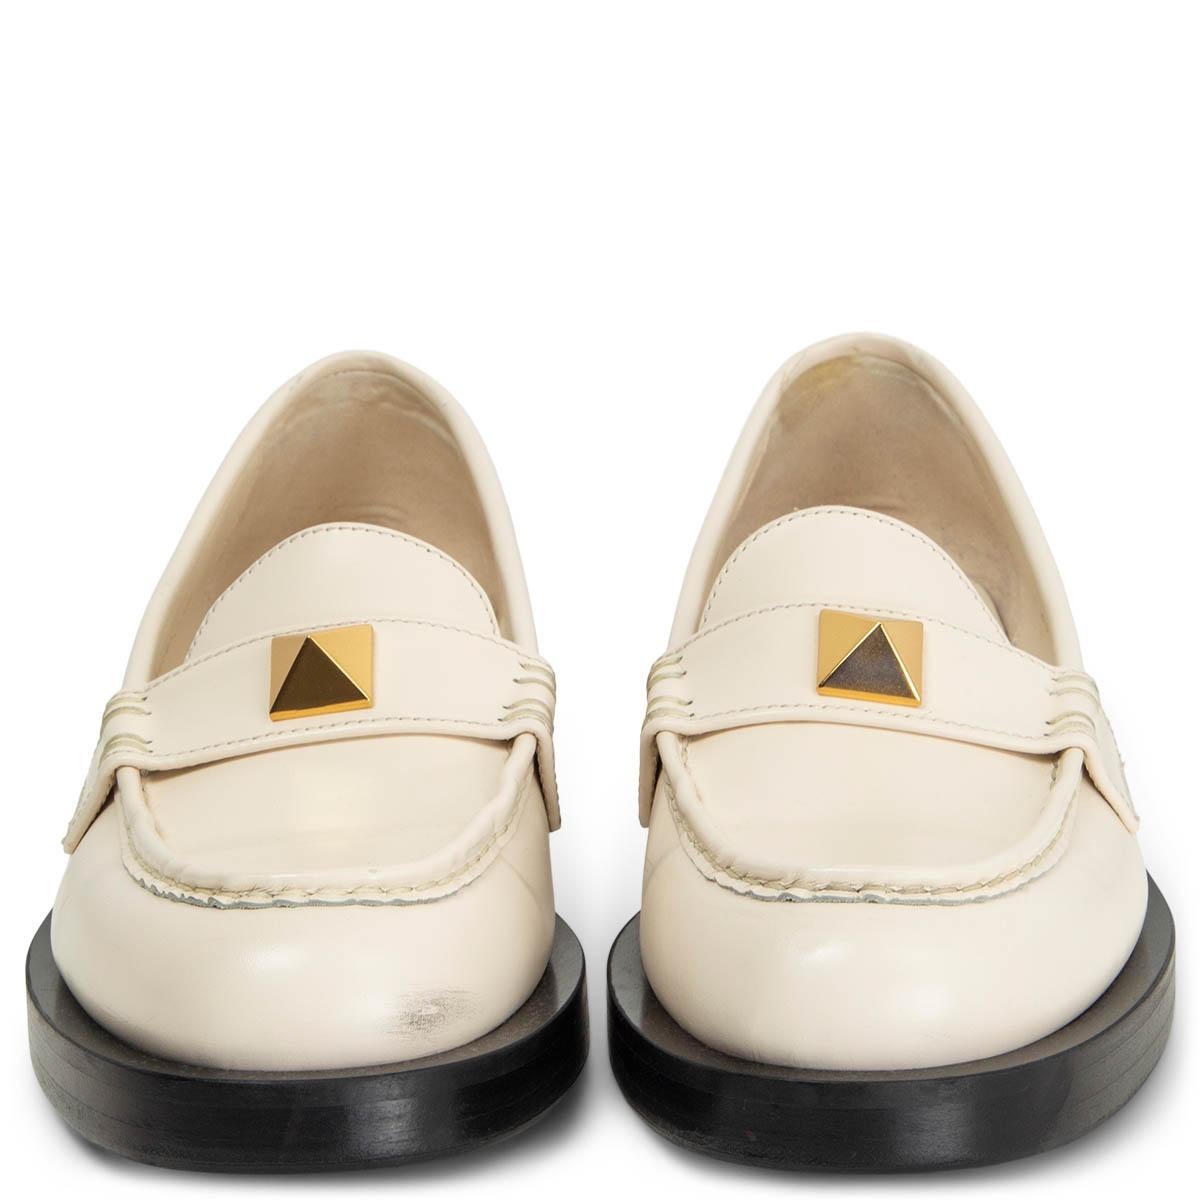 100% authentic Valentino Garavani Roman Stud loafer in ivory brushed calfskin. 18x18 mm maxi stud with an antique-brass finish and antique-brass finish maxi studs on the heel. Have been worn and are in excellent condition. Rubber sole got added.